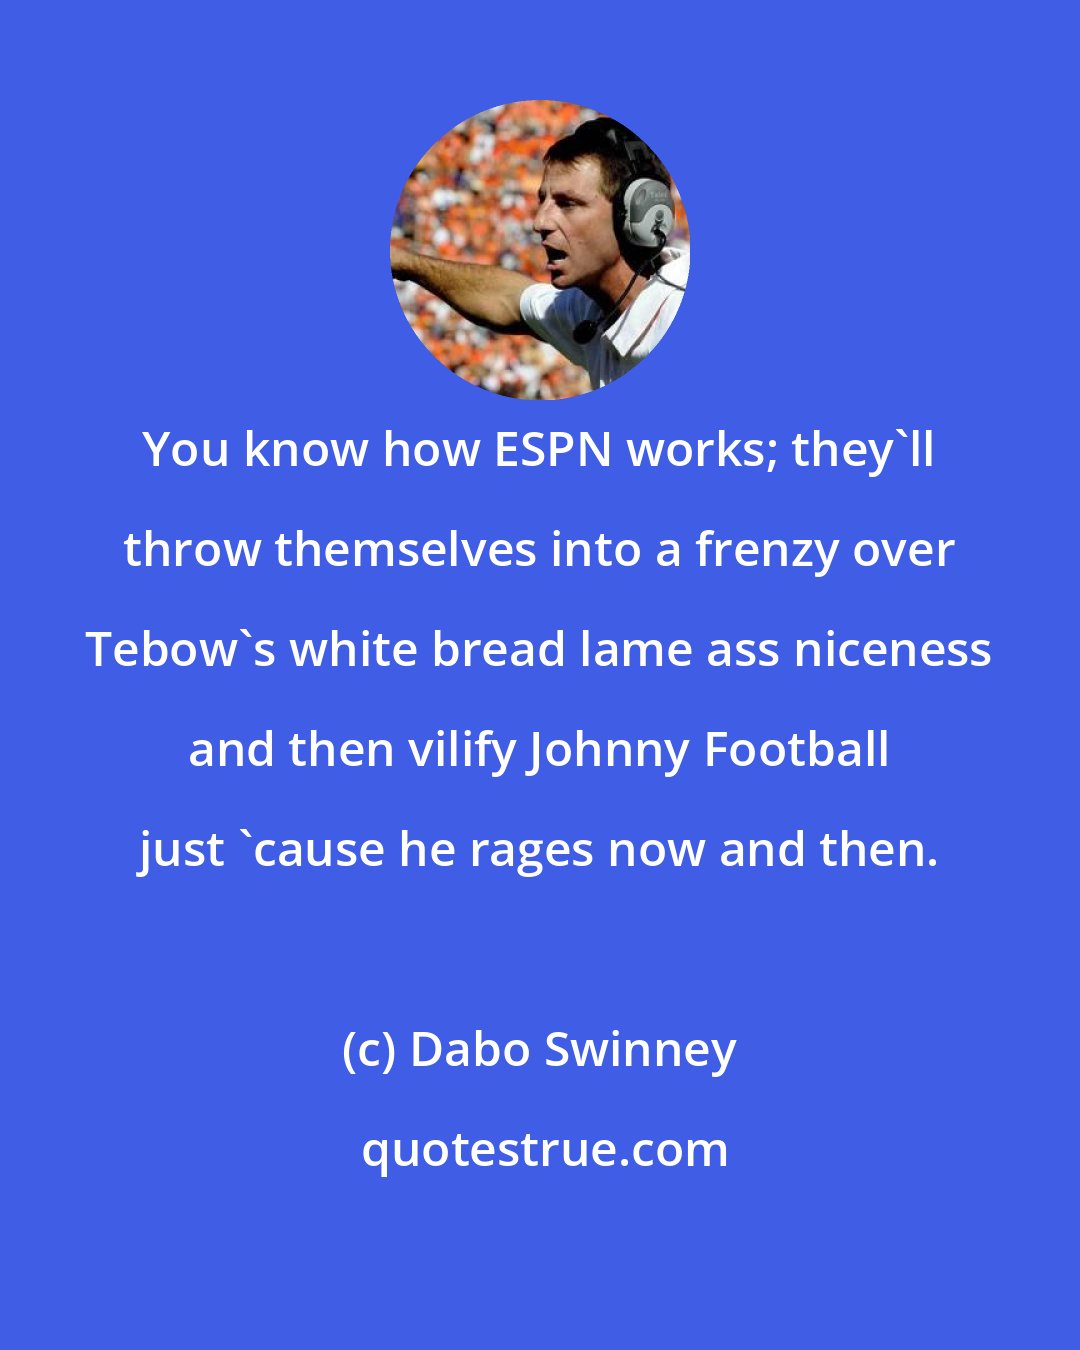 Dabo Swinney: You know how ESPN works; they'll throw themselves into a frenzy over Tebow's white bread lame ass niceness and then vilify Johnny Football just 'cause he rages now and then.